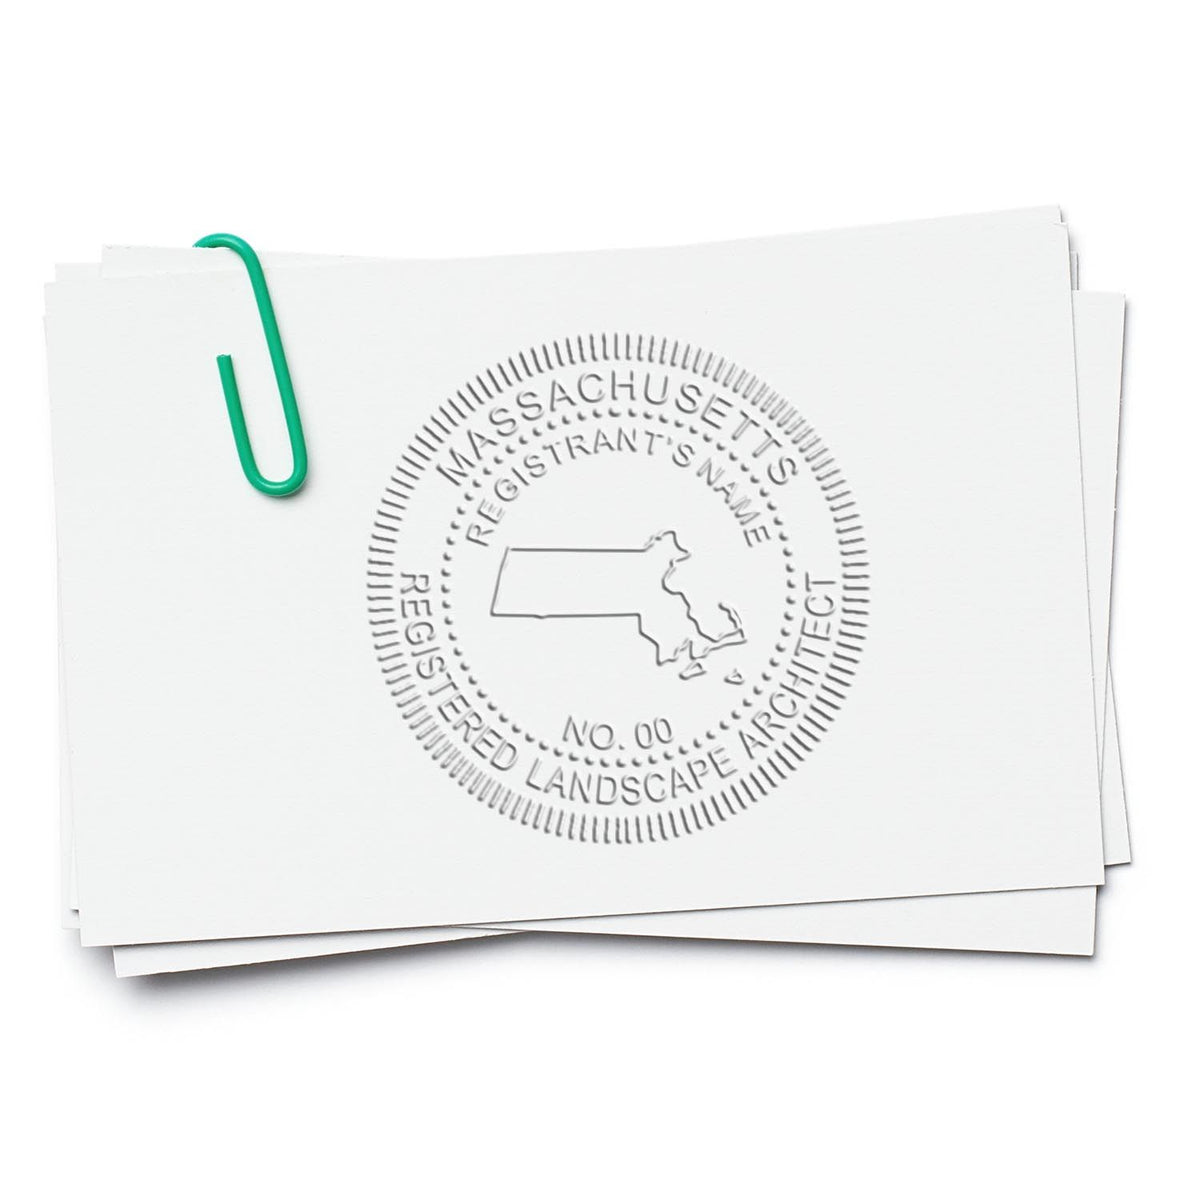 An in use photo of the Gift Massachusetts Landscape Architect Seal showing a sample imprint on a cardstock